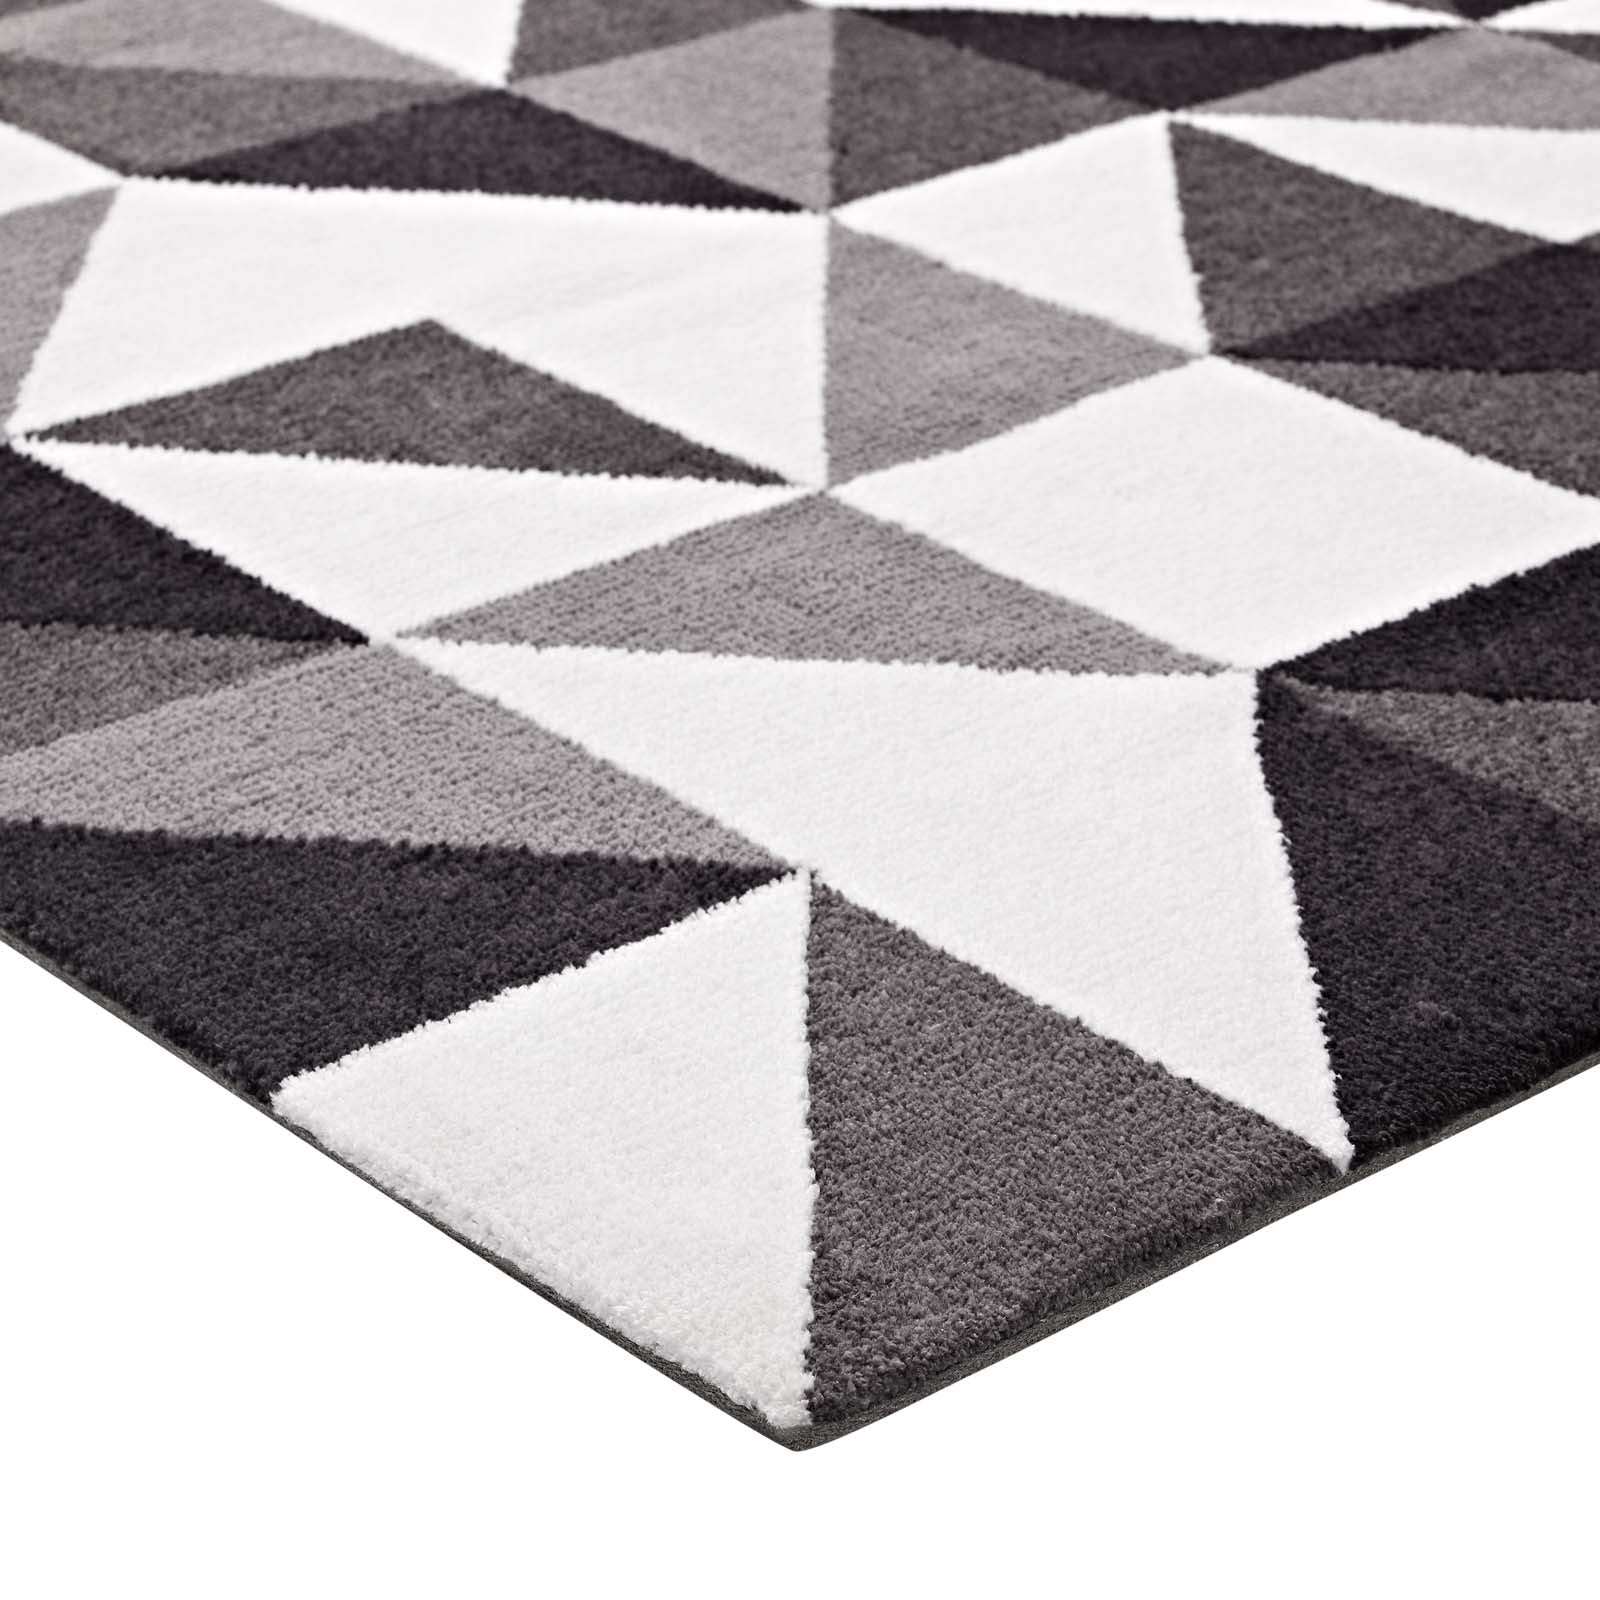 Modway Indoor Rugs - Kahula Geometric Triangle Mosaic 5' X 8' Area Rug Black, Gray and White